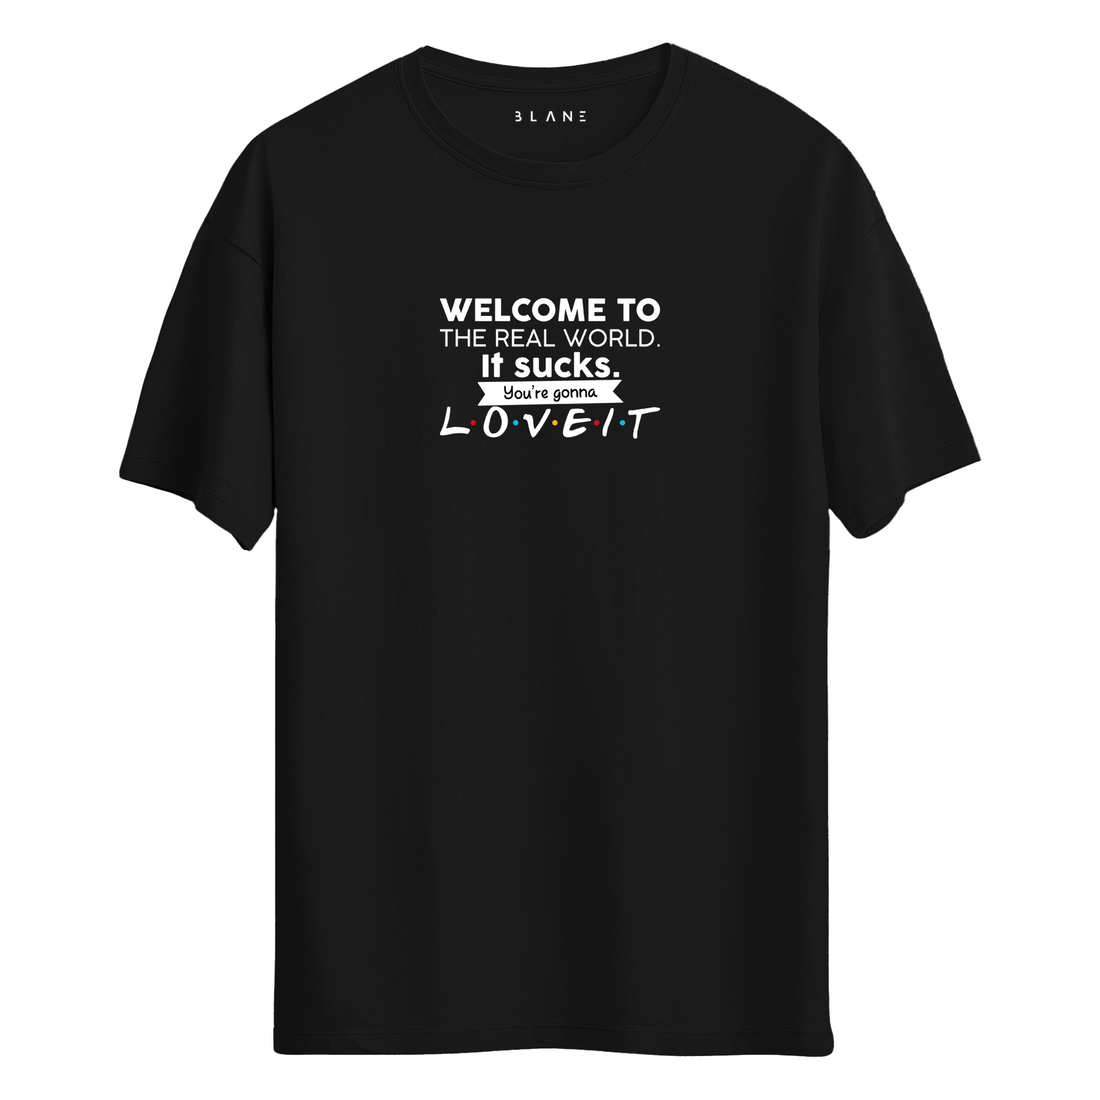 Welcome To The Real World - T-Shirt